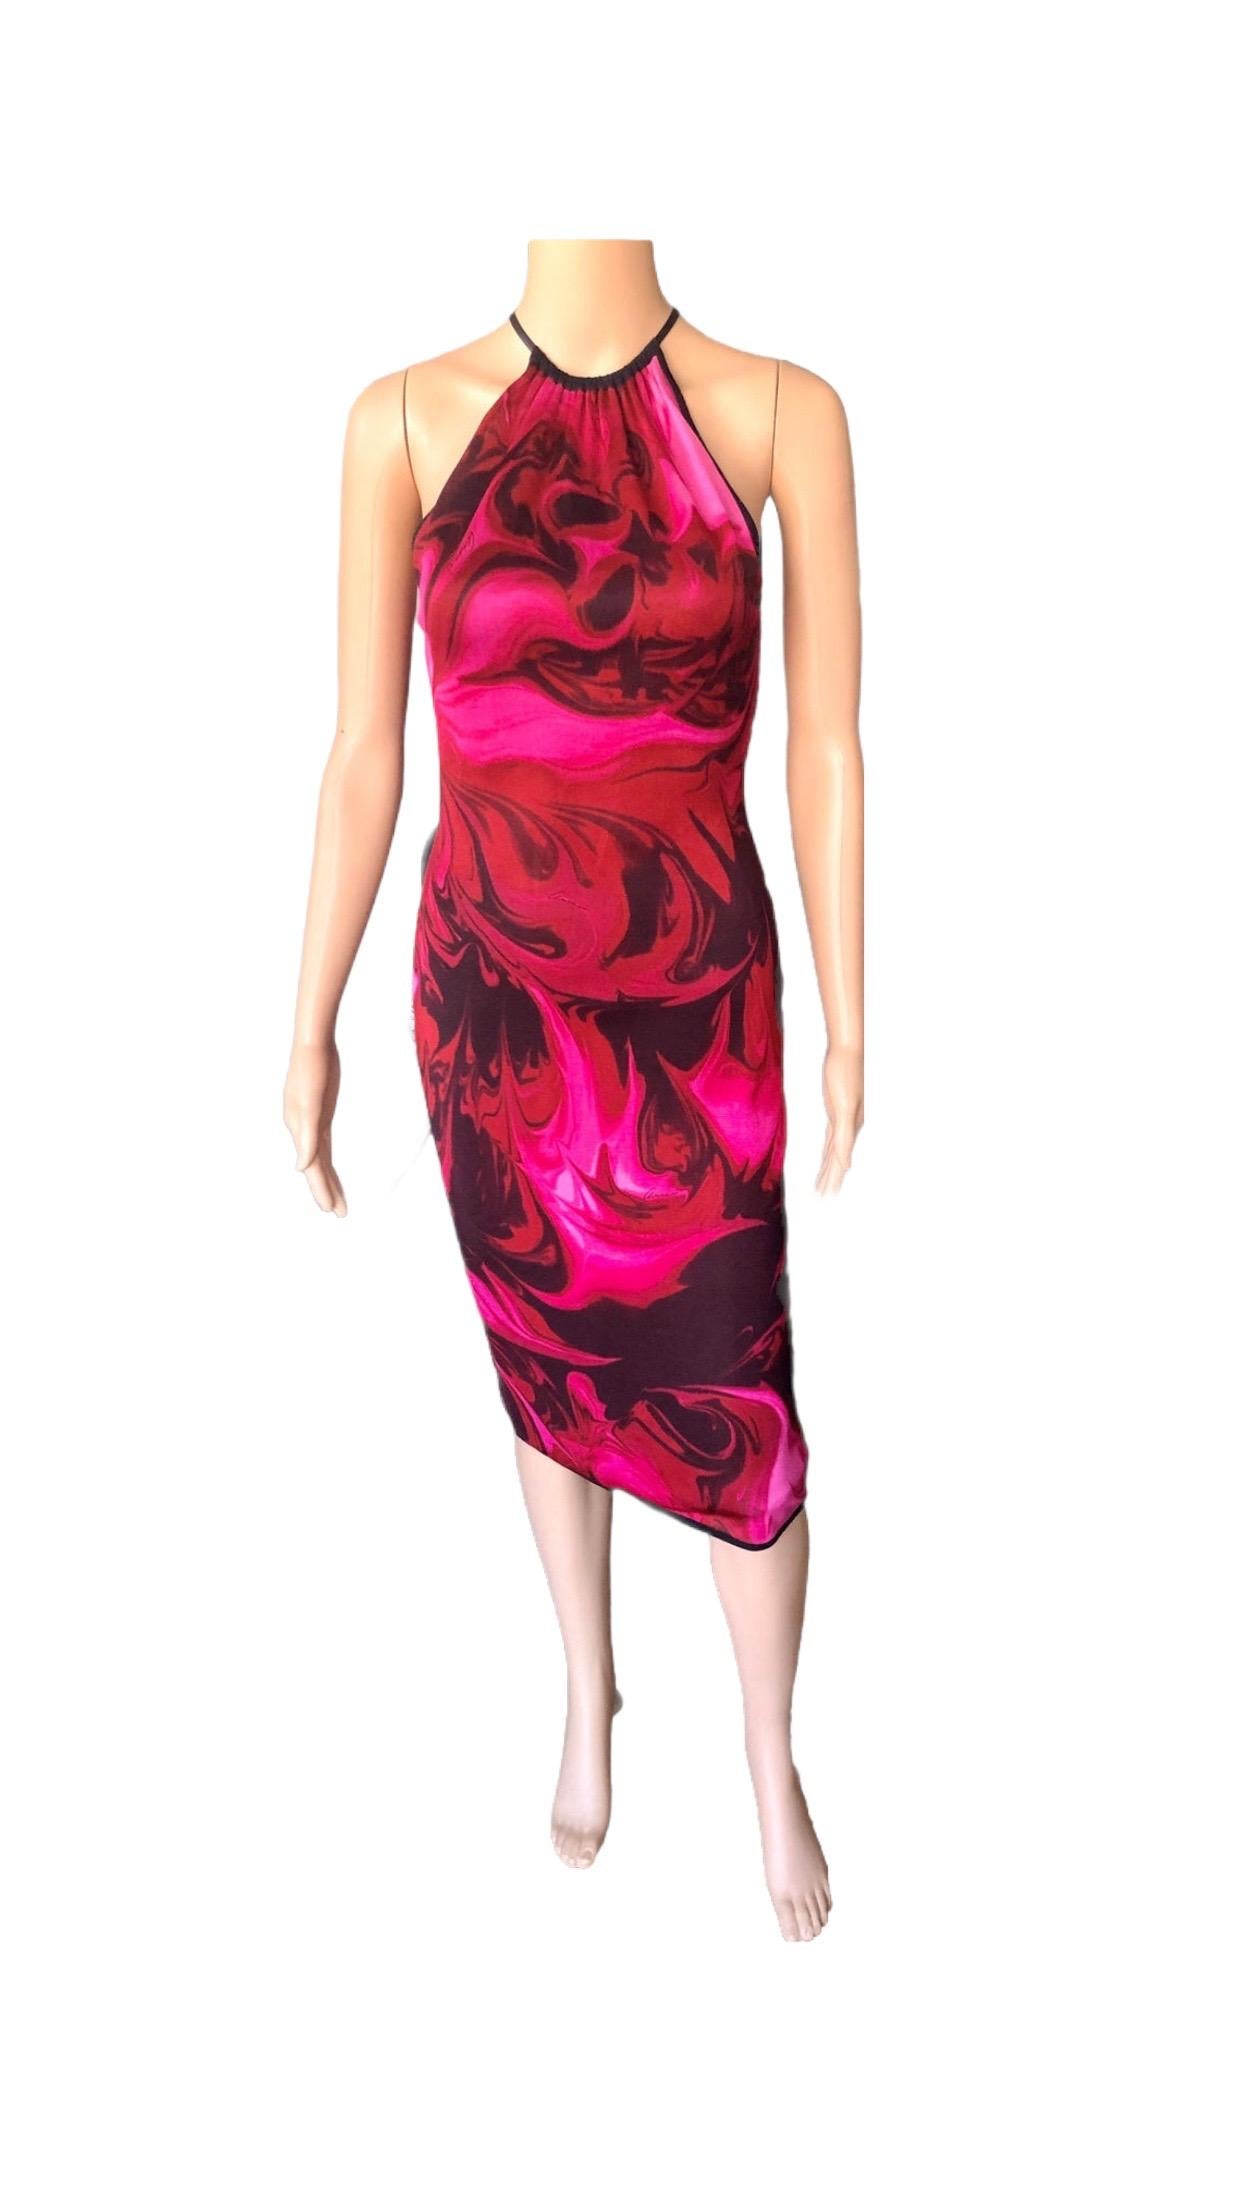 Tom Ford for Gucci S/S 2001 Bodycon Knit Printed Midi Dress 8